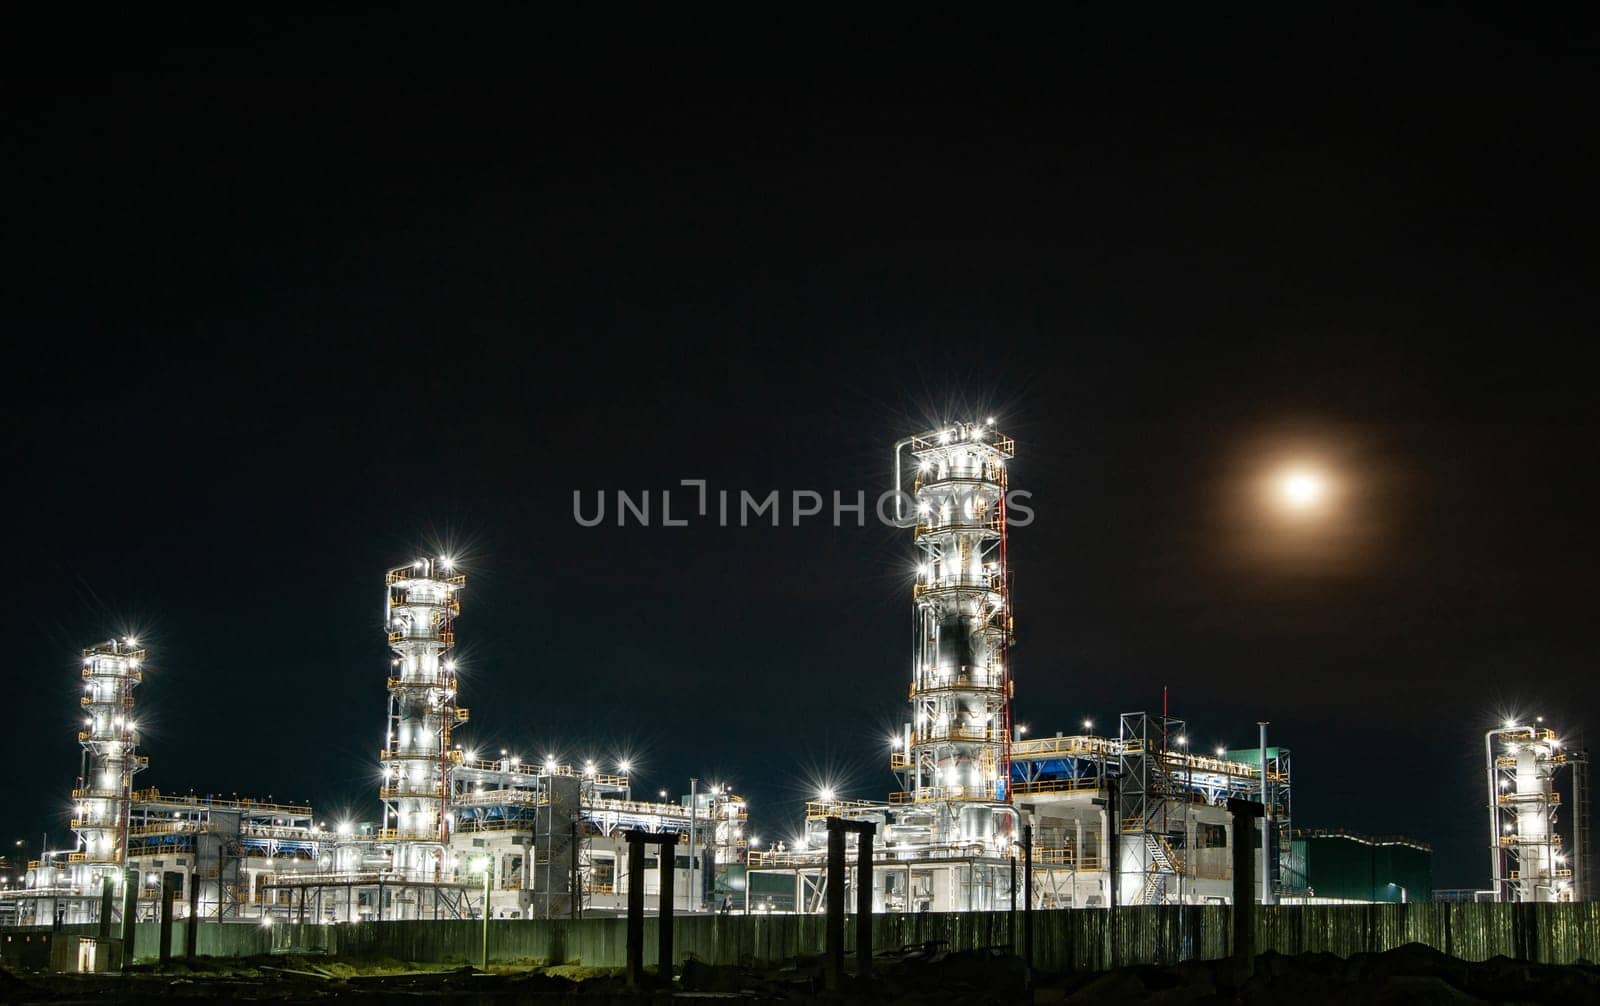 The oil refinery factory at night by A_Karim